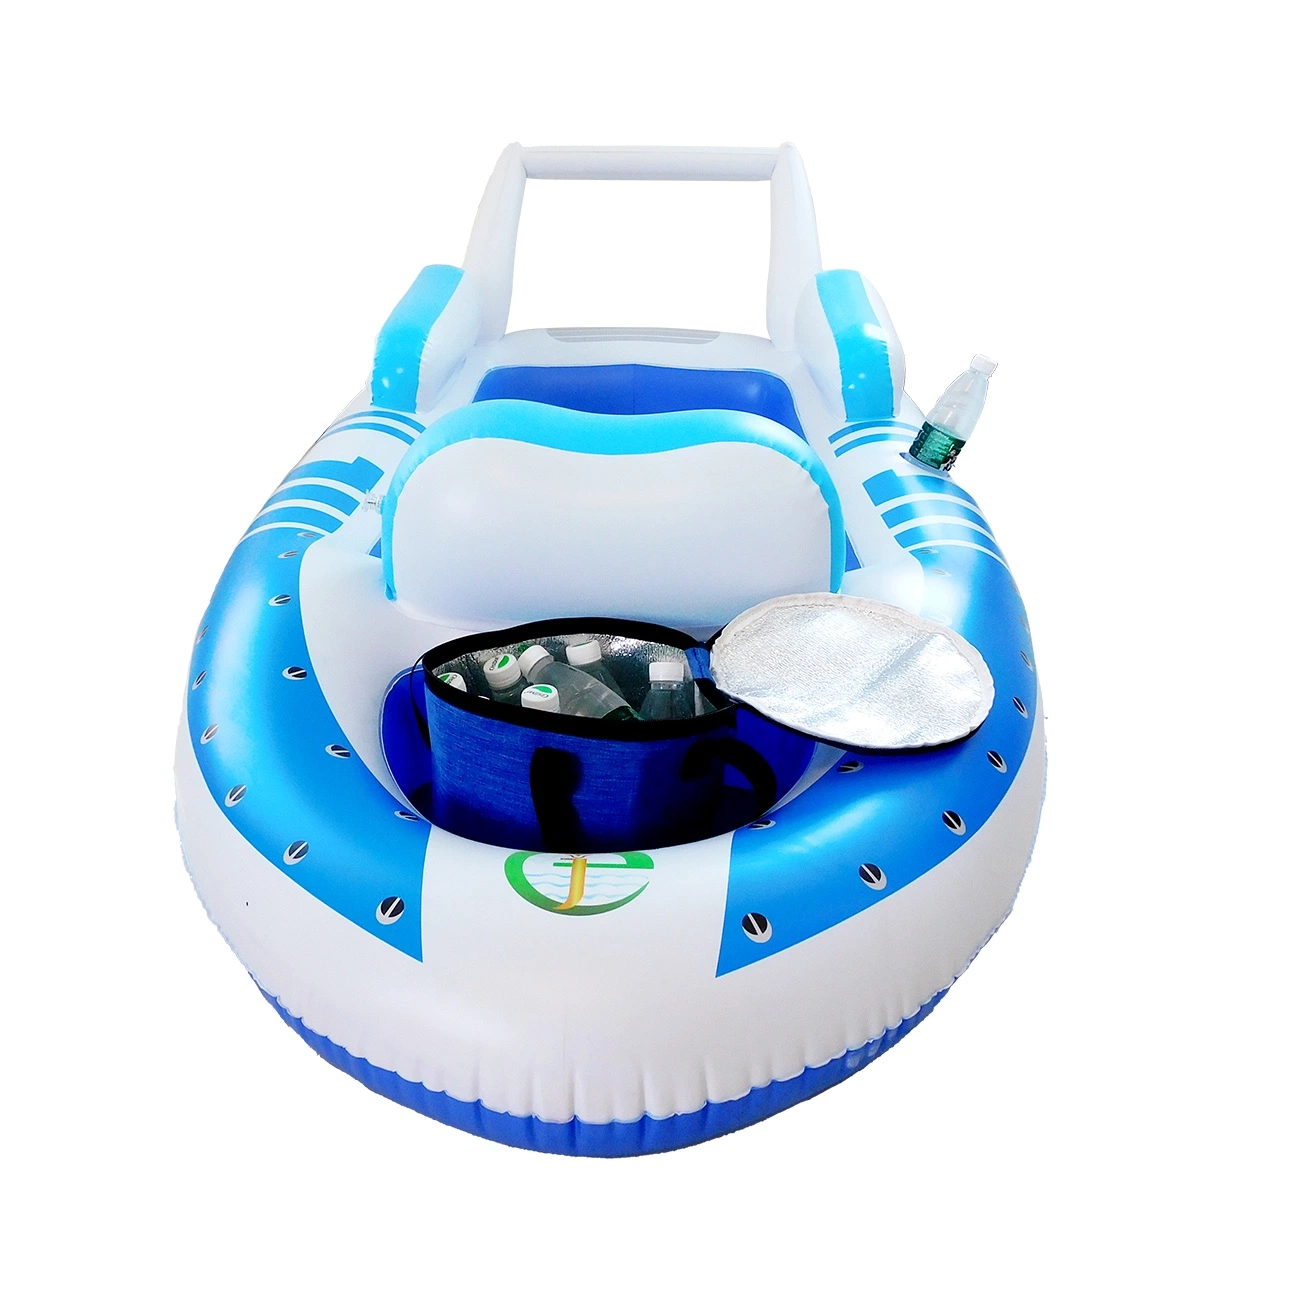 Outdoor Inflatable Adult Swimming Lounge Drink Holder Play Toys Pool Boat Float